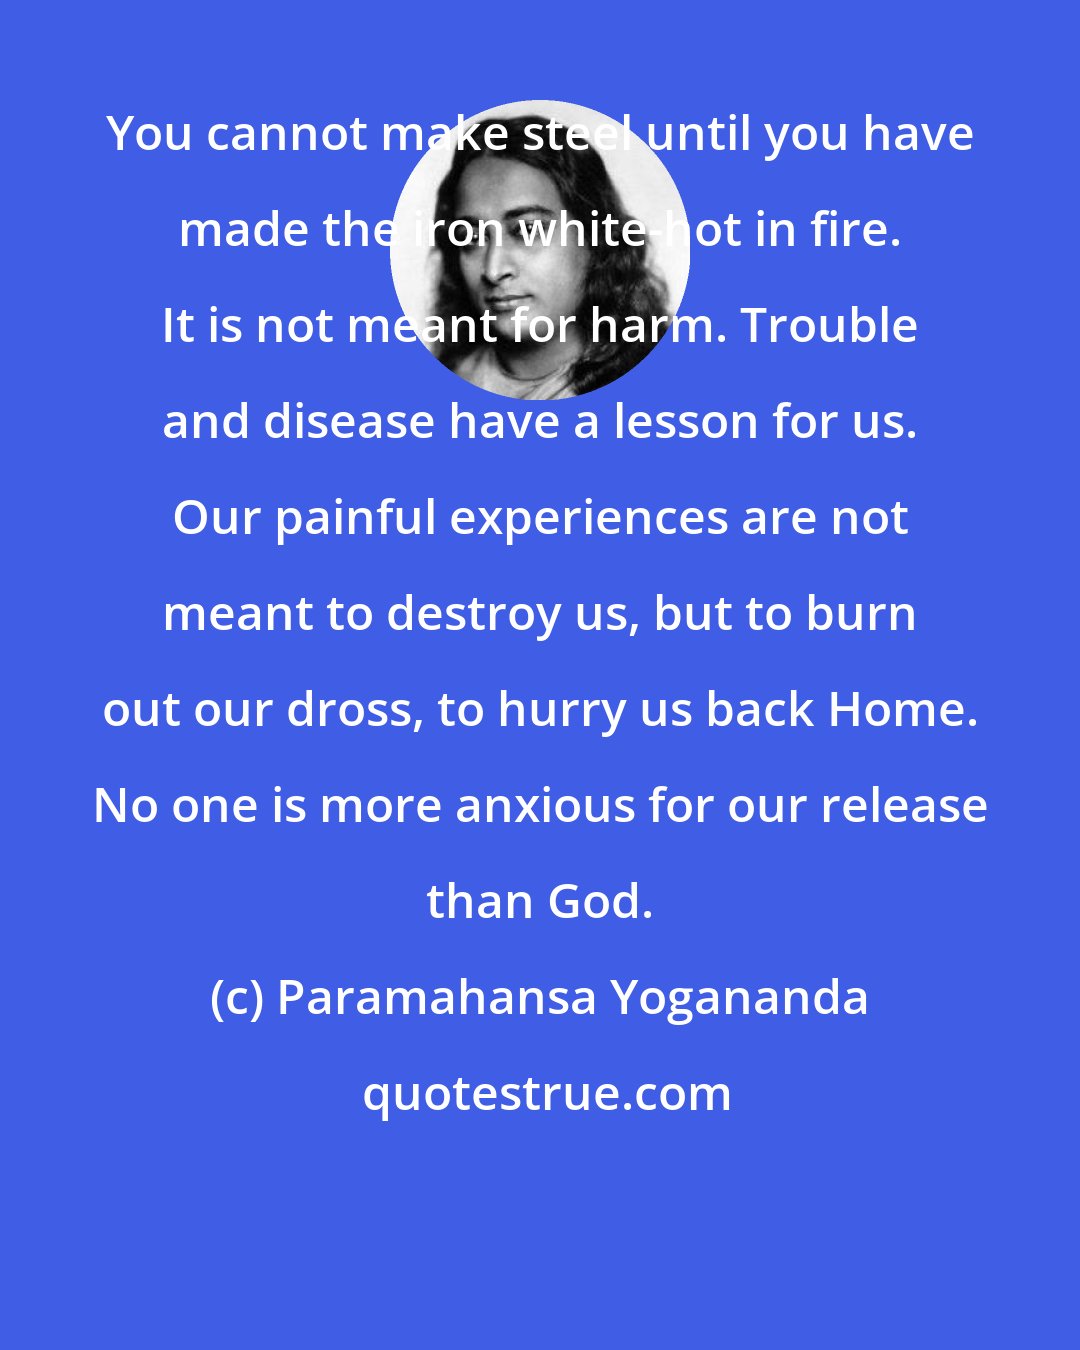 Paramahansa Yogananda: You cannot make steel until you have made the iron white-hot in fire. It is not meant for harm. Trouble and disease have a lesson for us. Our painful experiences are not meant to destroy us, but to burn out our dross, to hurry us back Home. No one is more anxious for our release than God.